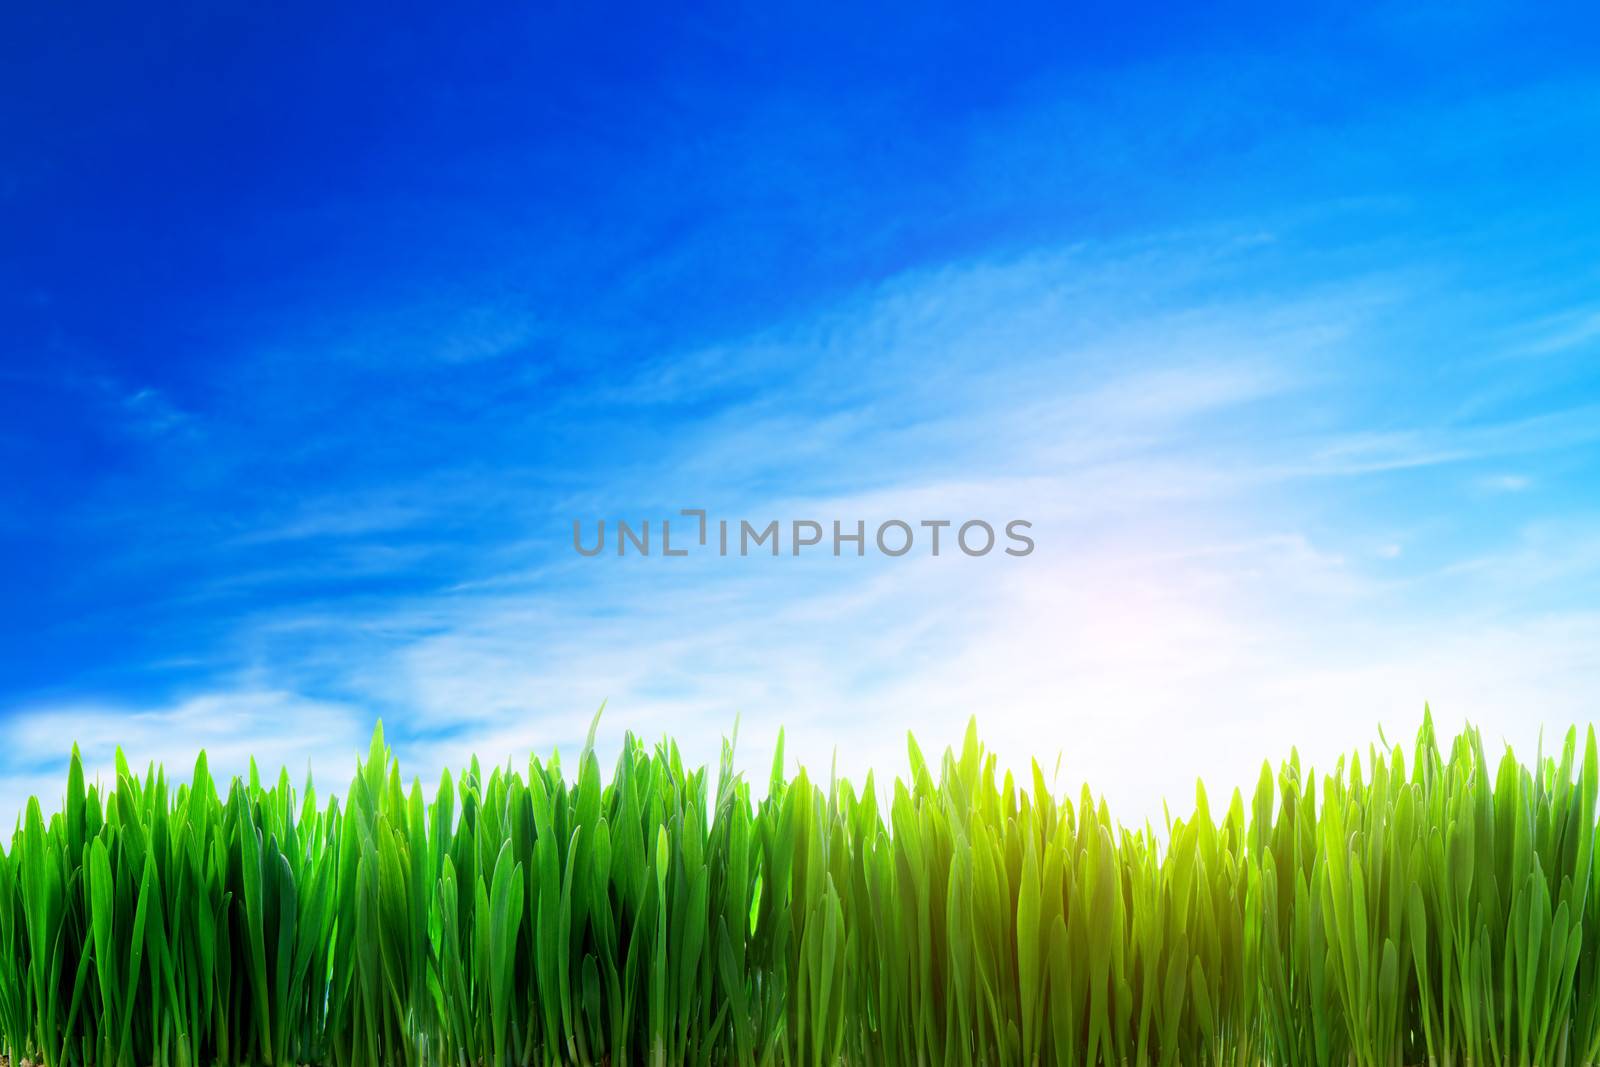 Perfect nature landscape background. Fresh grass field on a sunny day with blue sky